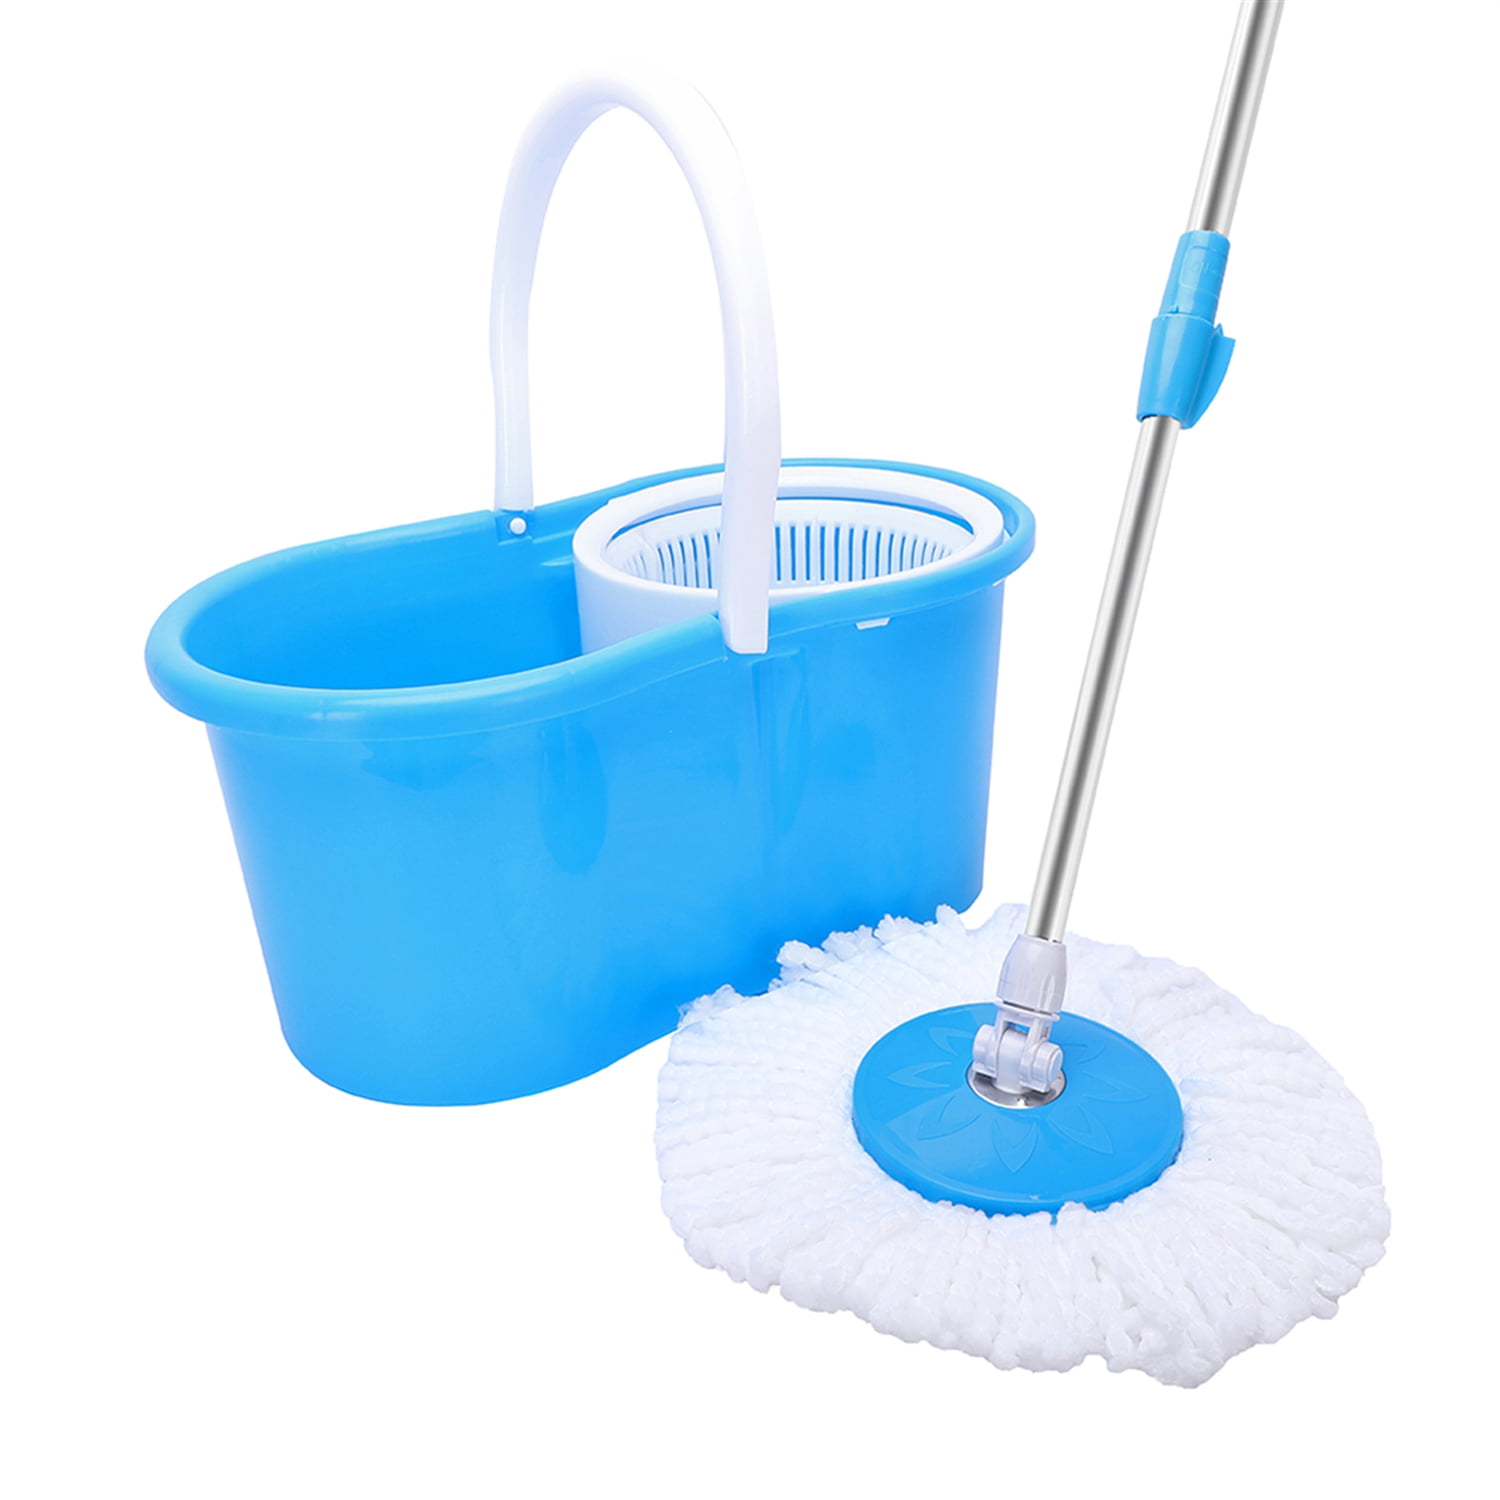 360° FLOOR MAGIC SPIN MOP BUCKET SET MICROFIBER ROTATING DRY HEADS WITH 2  HEADS